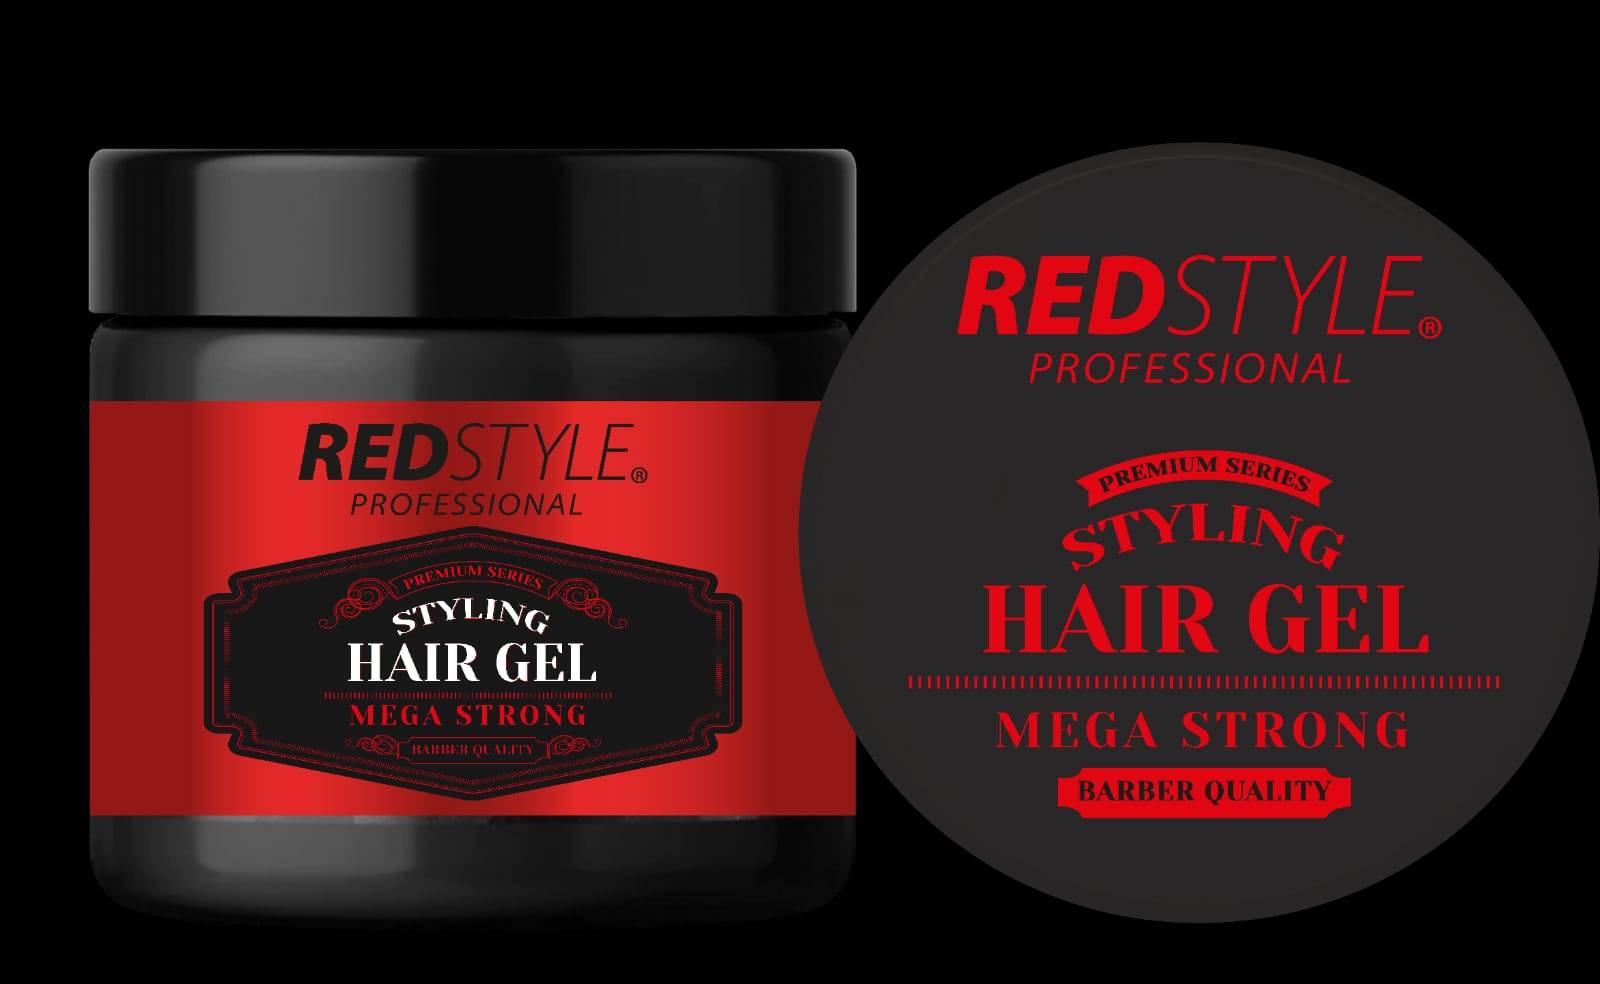 Redstyle Professional Styling Hair Gel Mega Strong - Styling Gel, Perfekter Glanz in Friseur-QualitÃ¤t